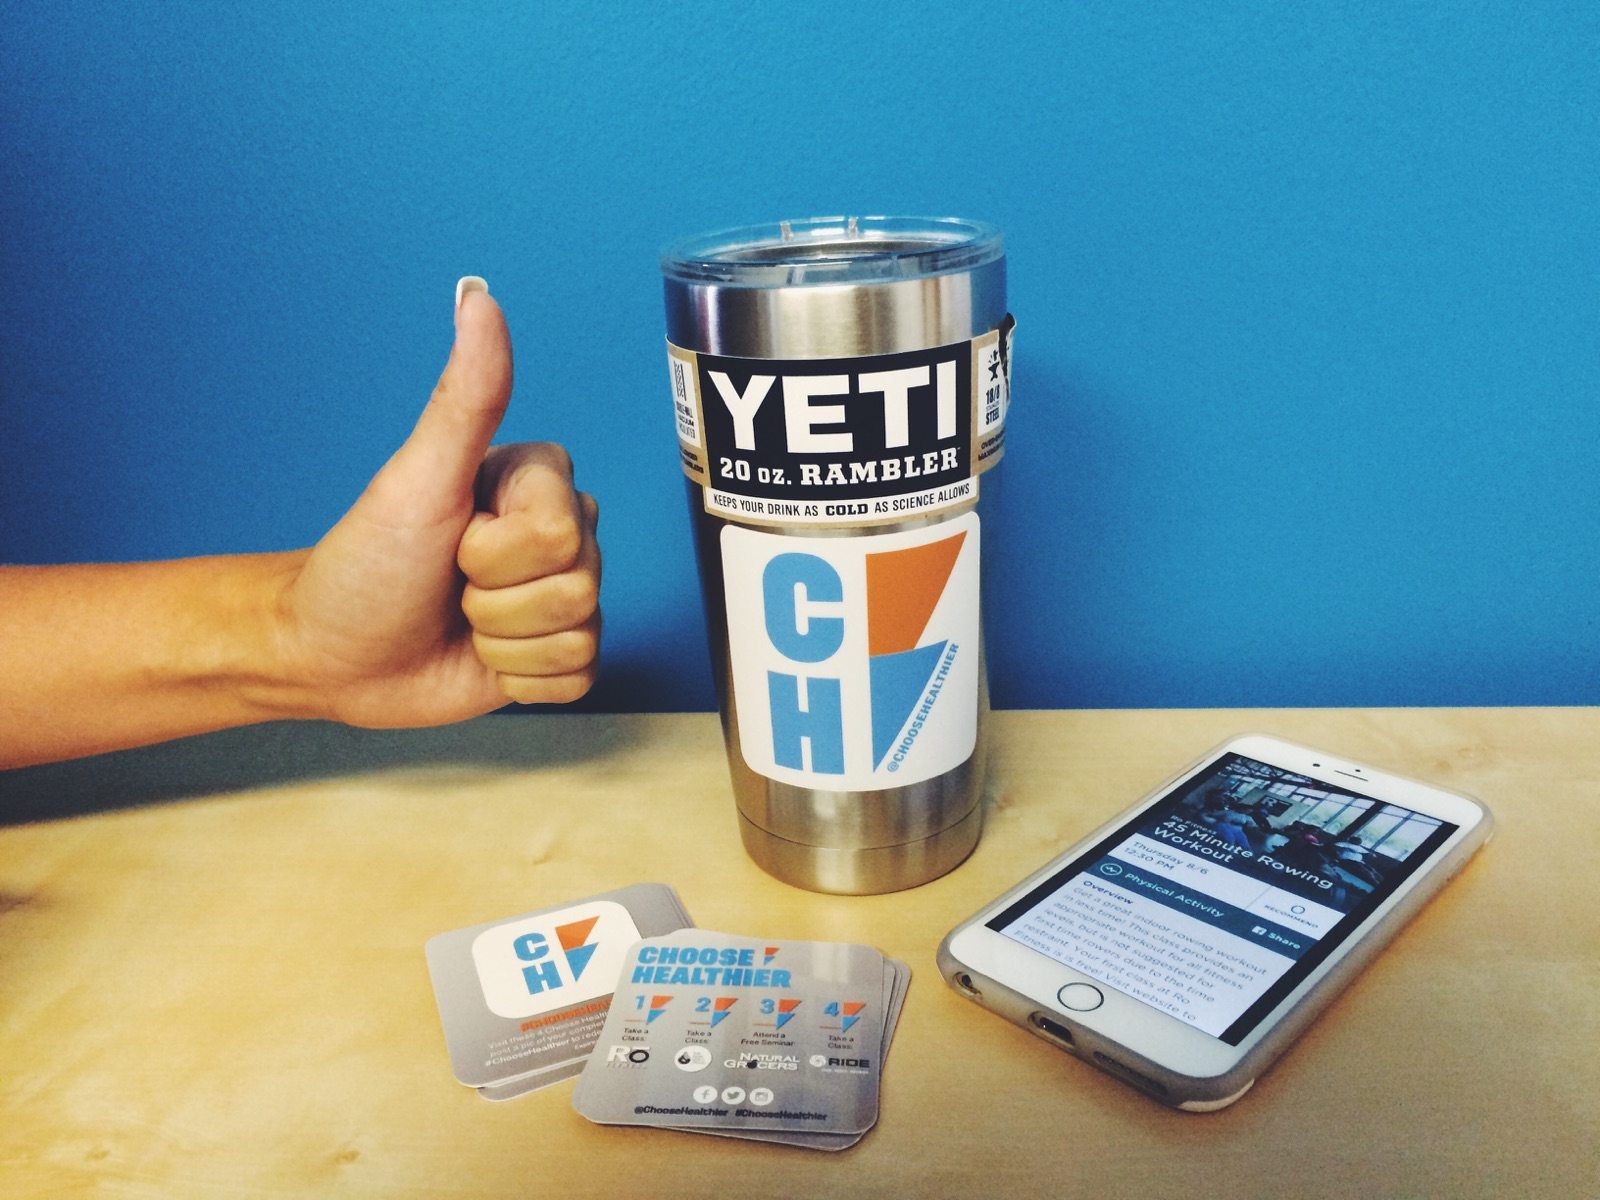 Featured image for “Choose Healthier and win a Yeti Tumbler!”